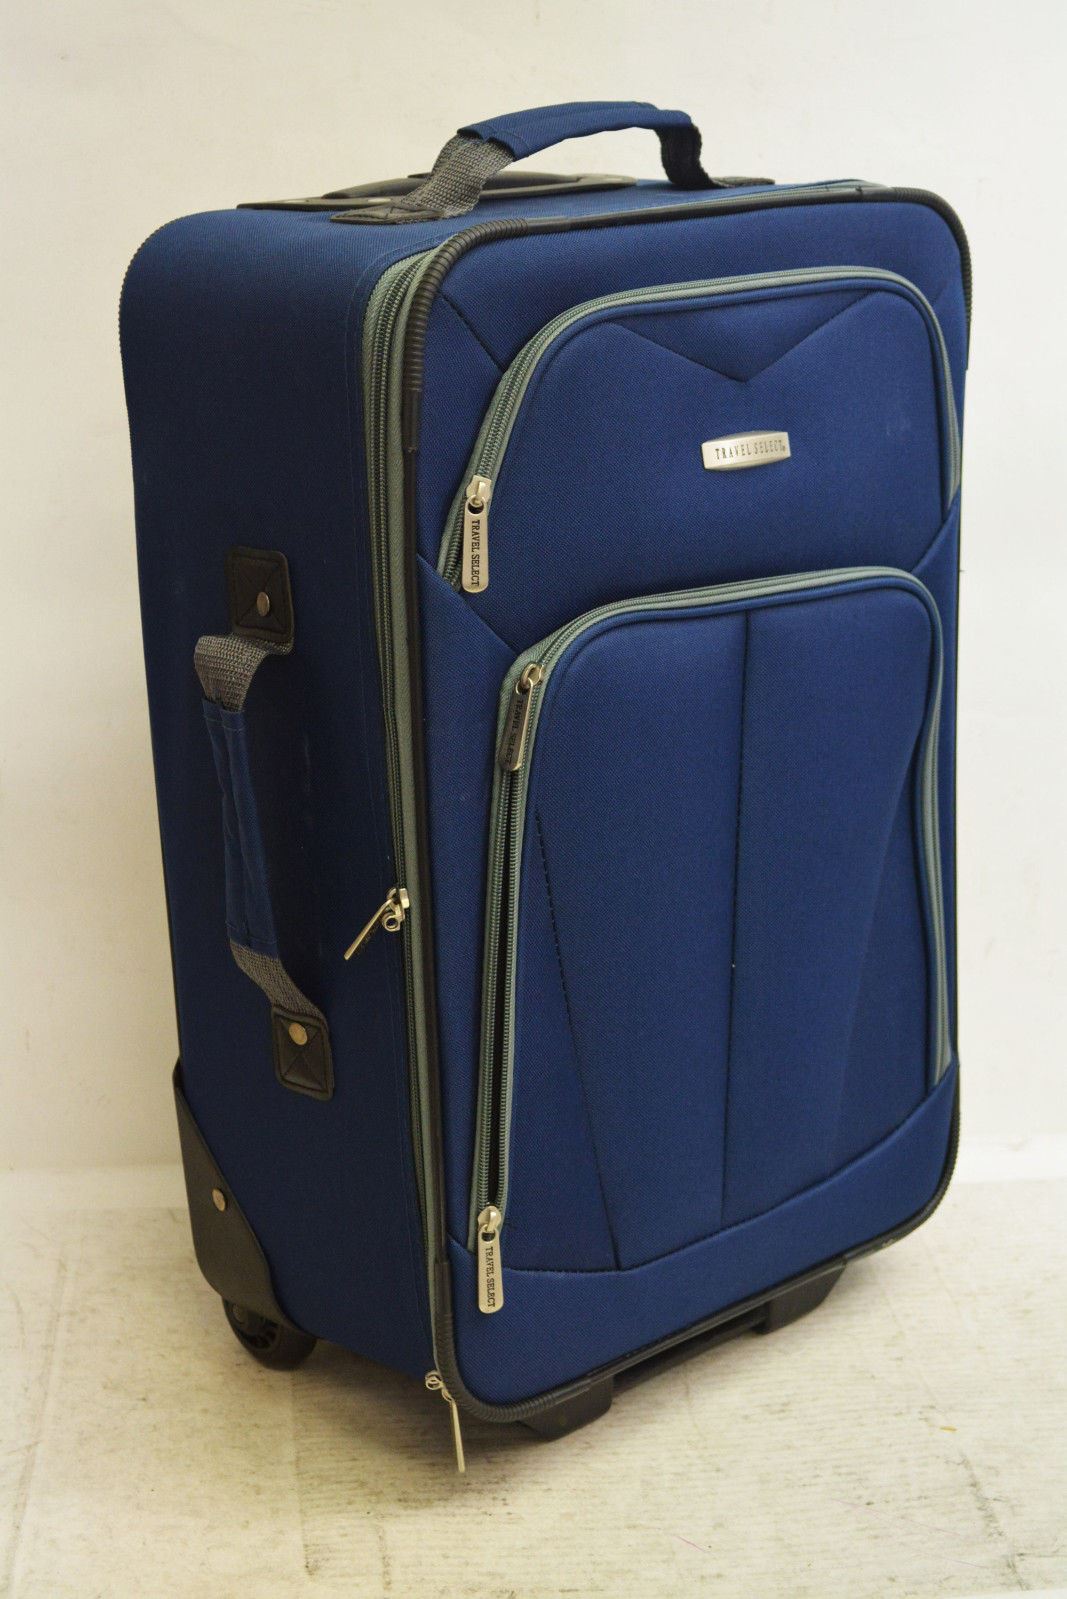 $280 NEW Travel Select Kingsway 20'' Rolling Wheel Suitcase Luggage Carry On